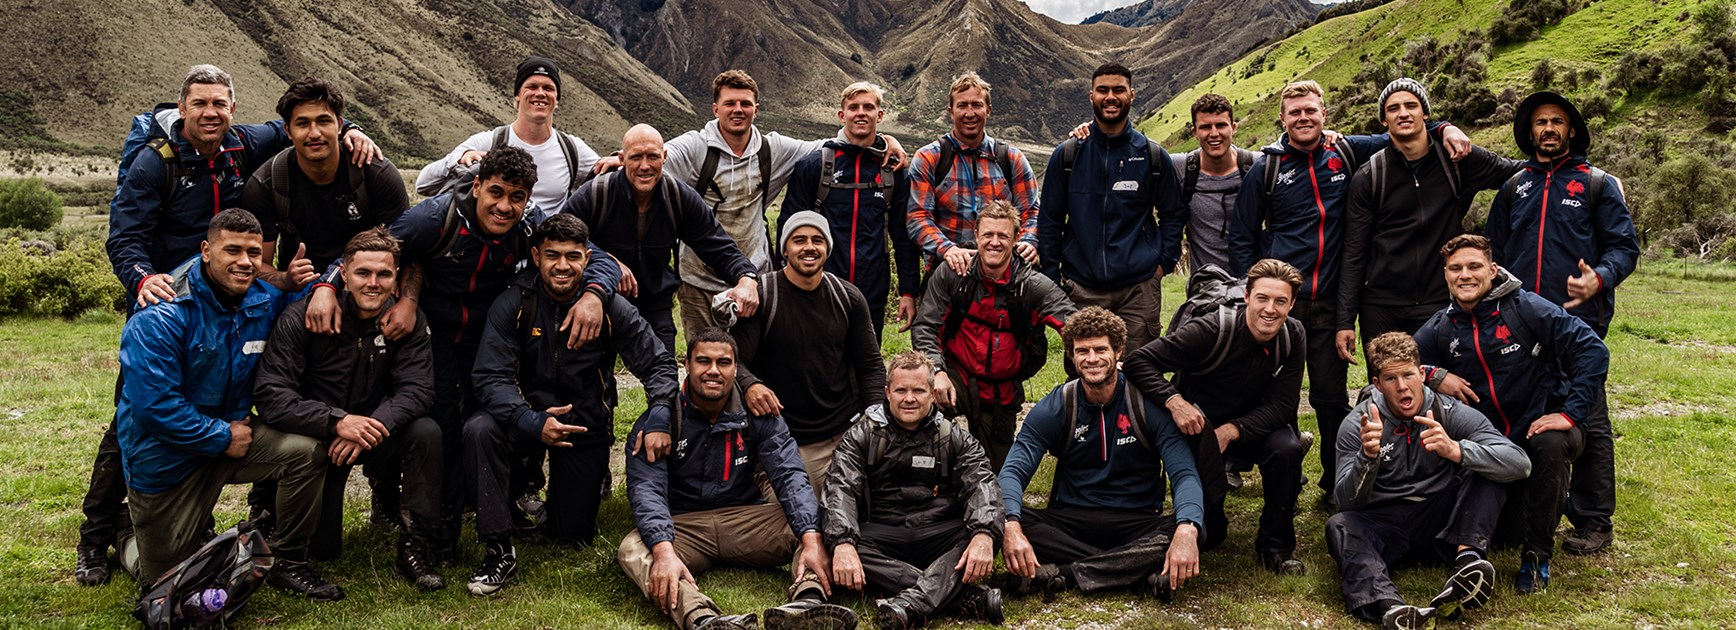 Nathan's first challenge with the Roosters squad, an army camp in Queenstown.